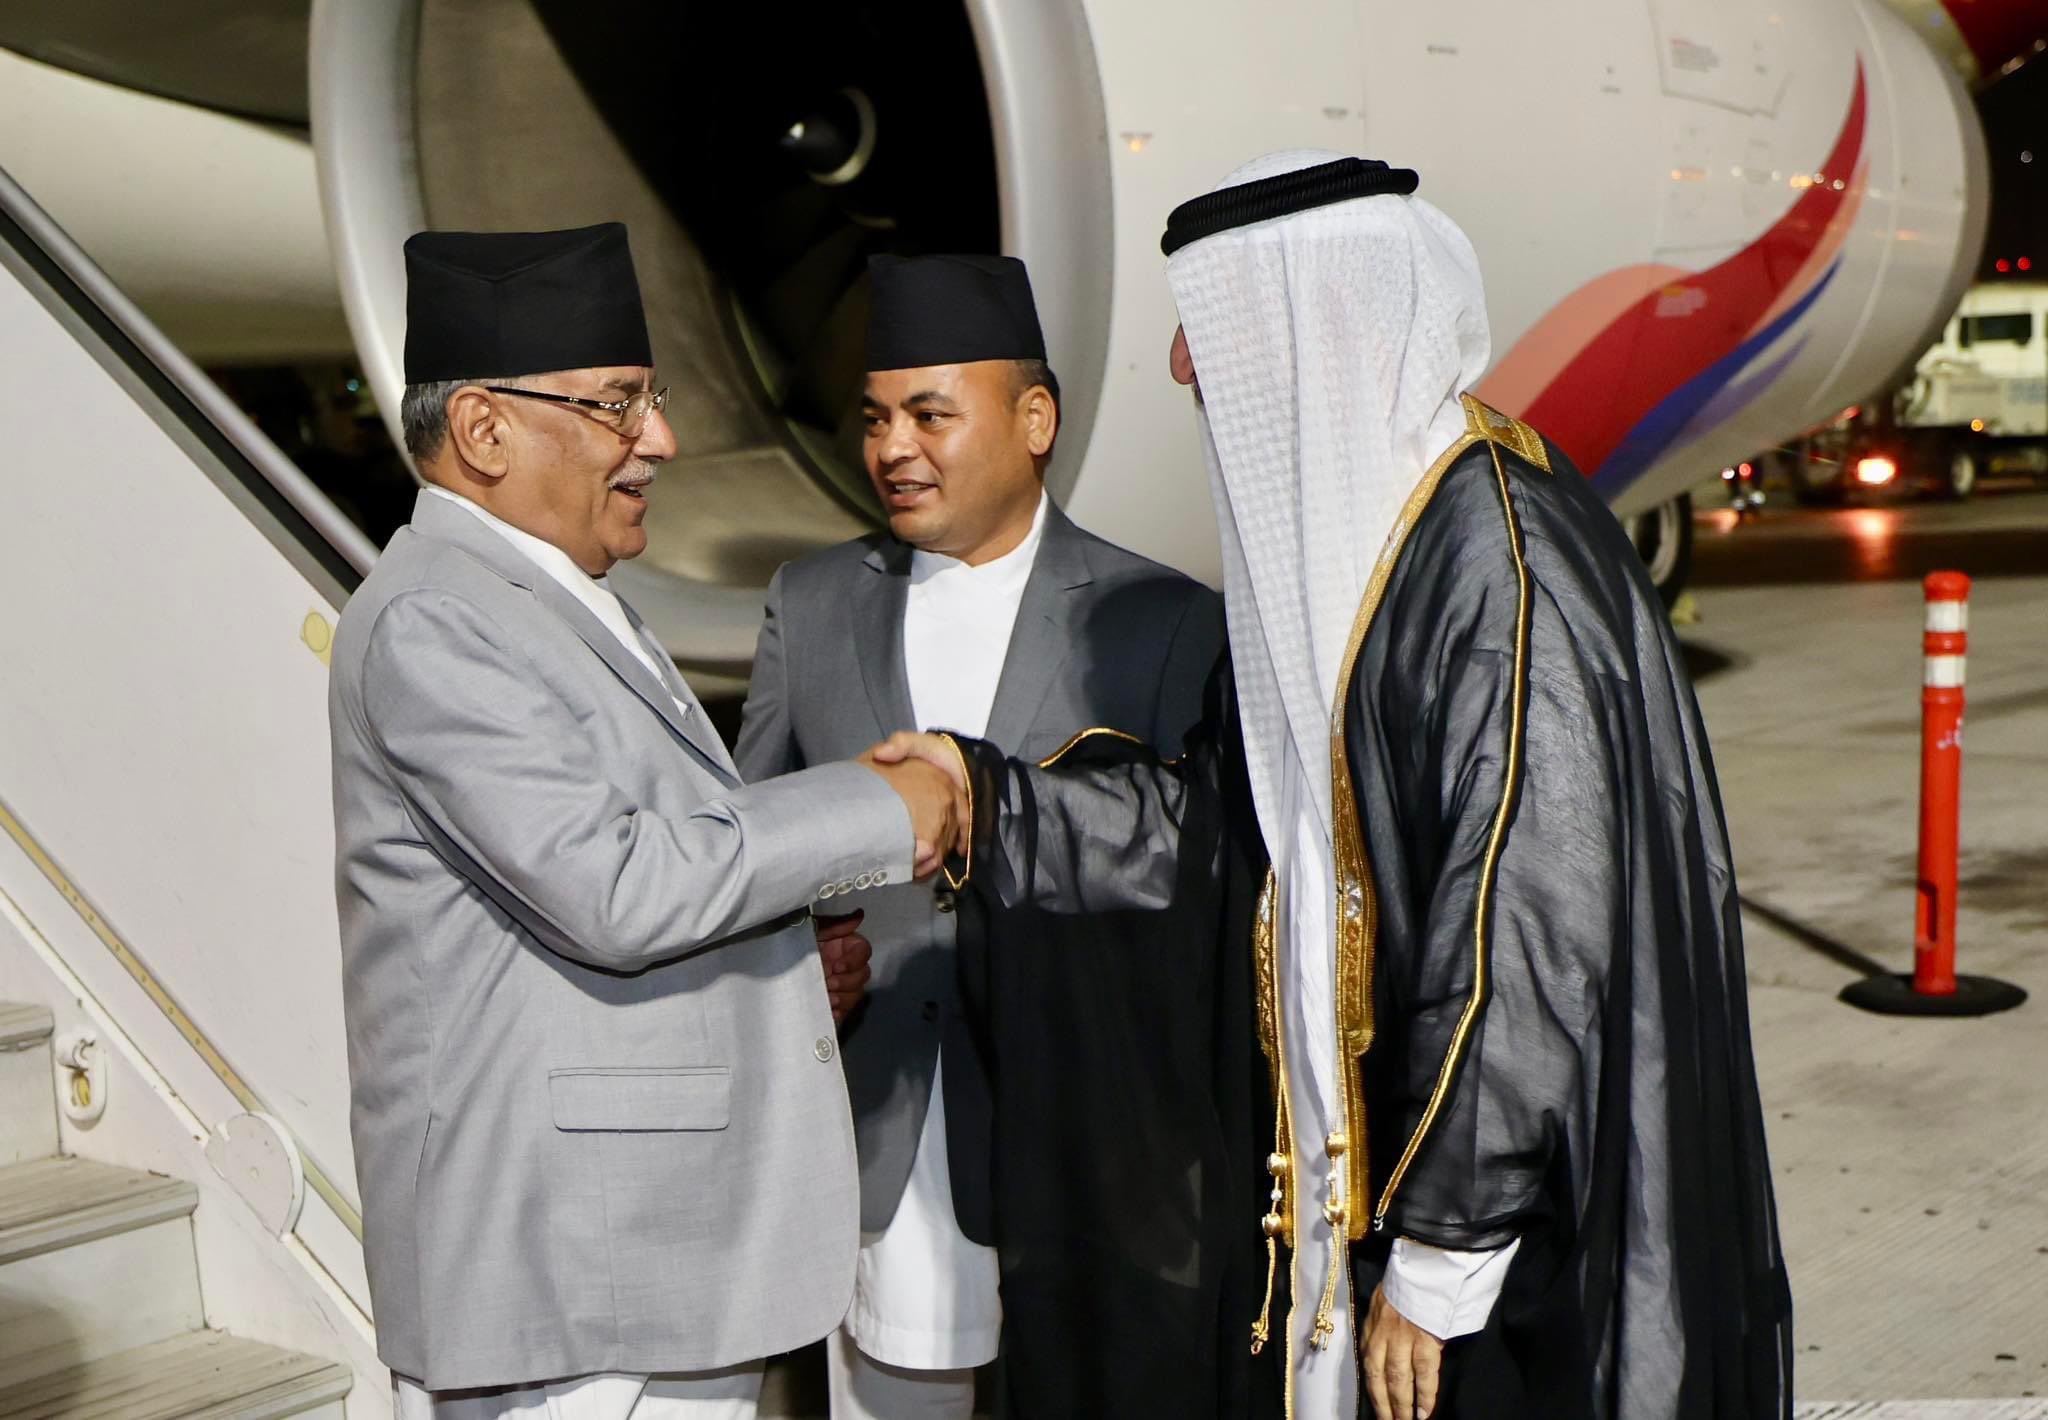 Prime Minister Dahal reaches UAE to attend COP 28